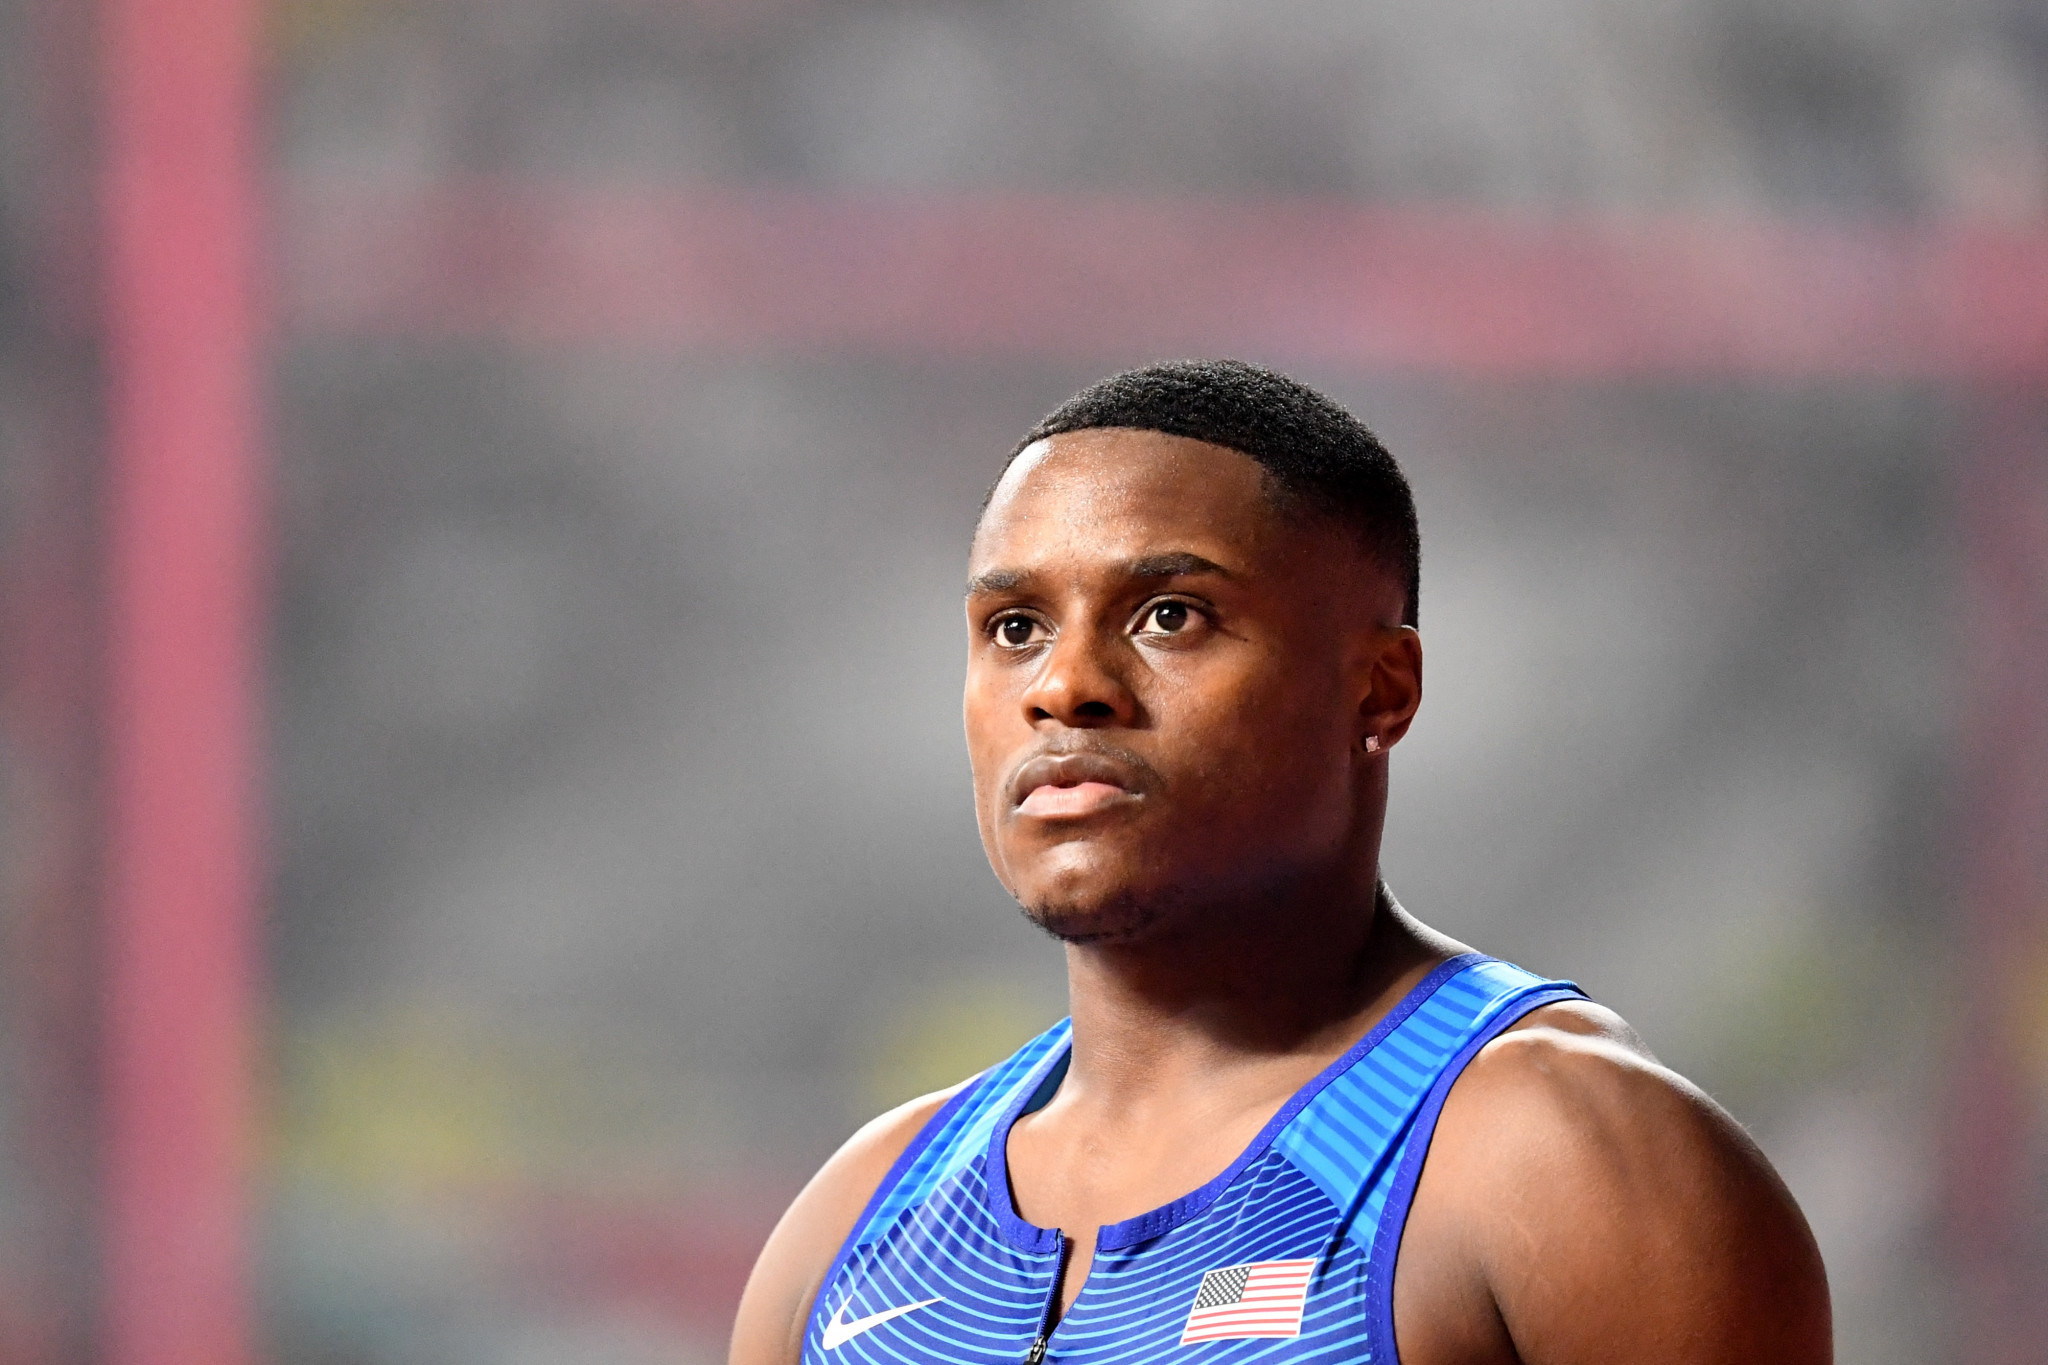 Christian Coleman is another American athlete to be hit with a suspension for whereabouts failures ©Getty Images